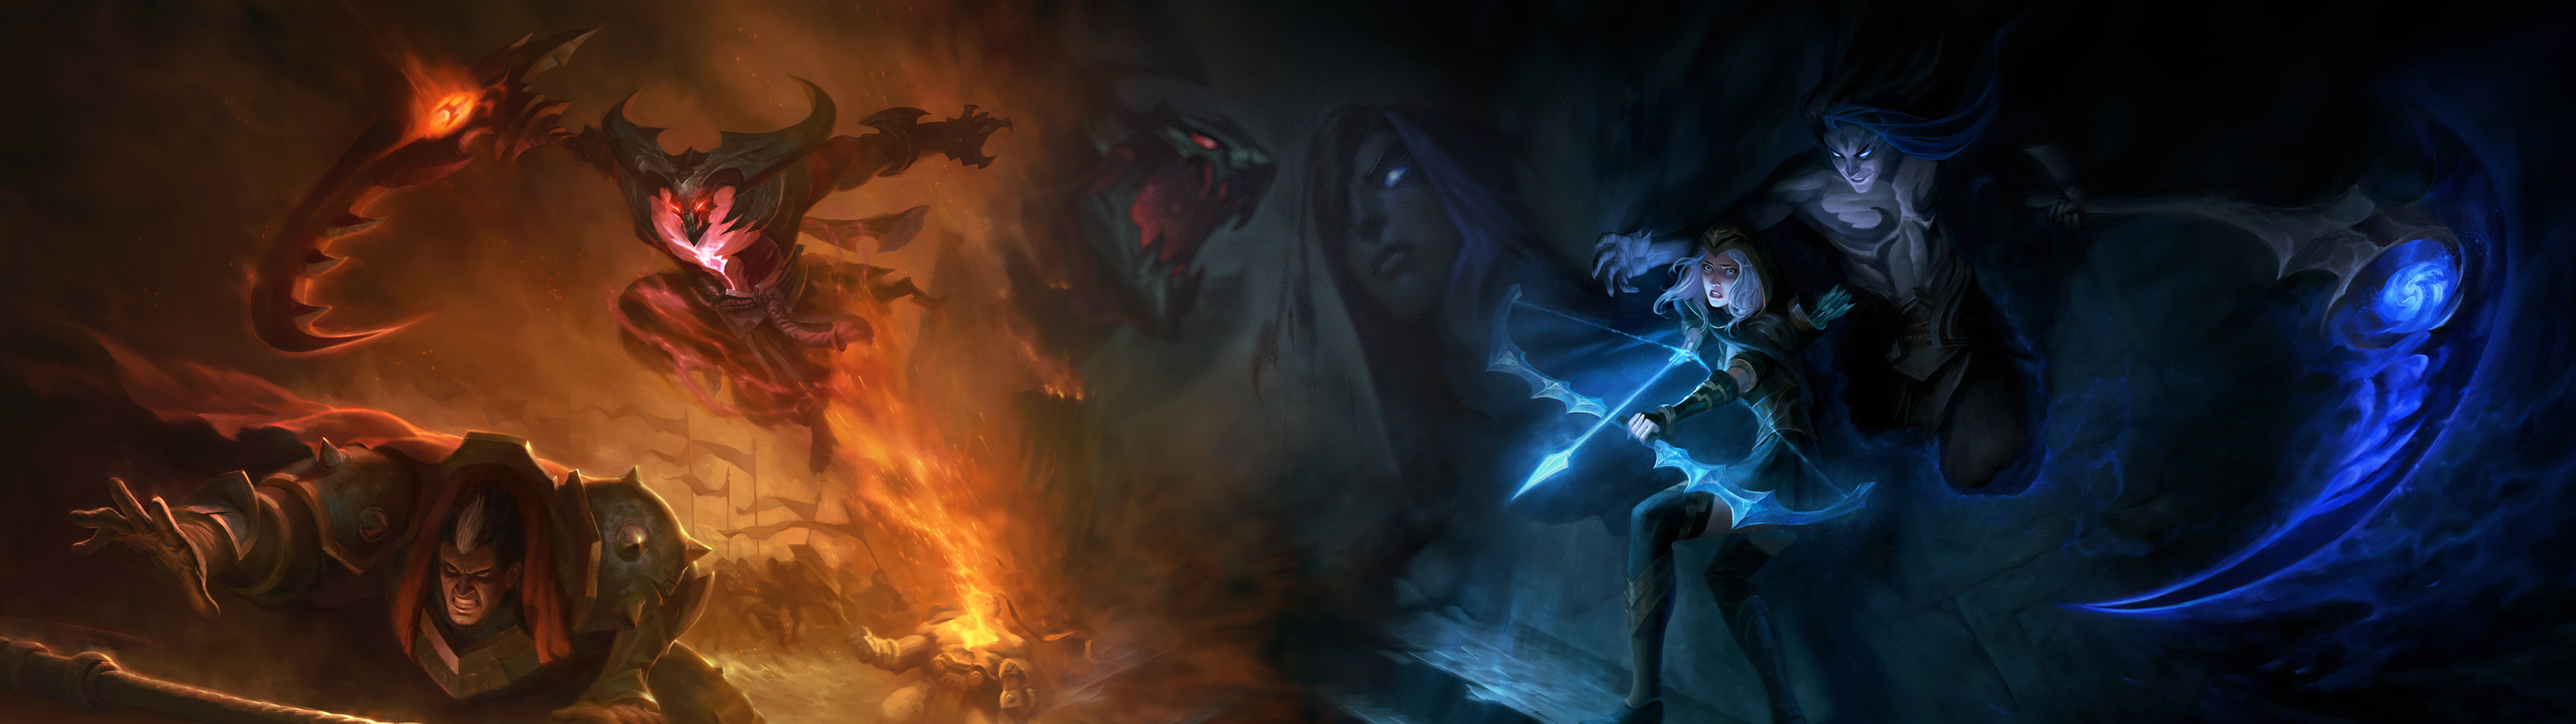 League of Legends Dual Monitor Wallpaper Free League of Legends Dual Monitor Background